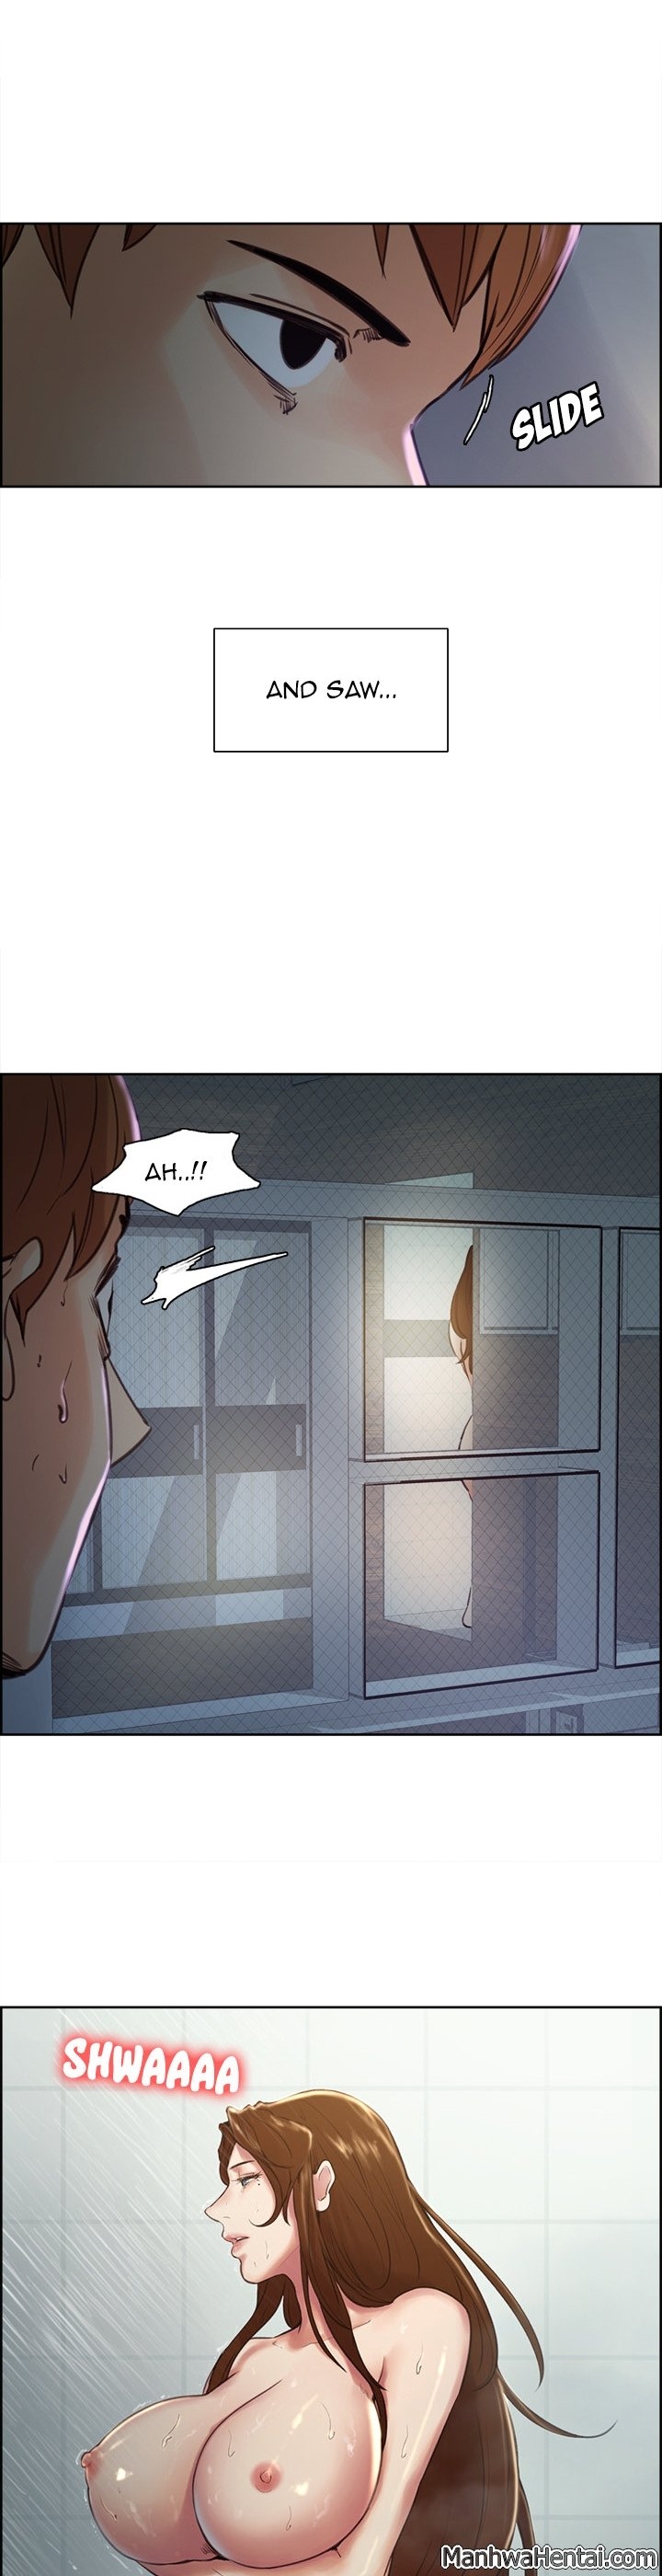 [Serious] The Sharehouse Ch. 1-11 [English] 145